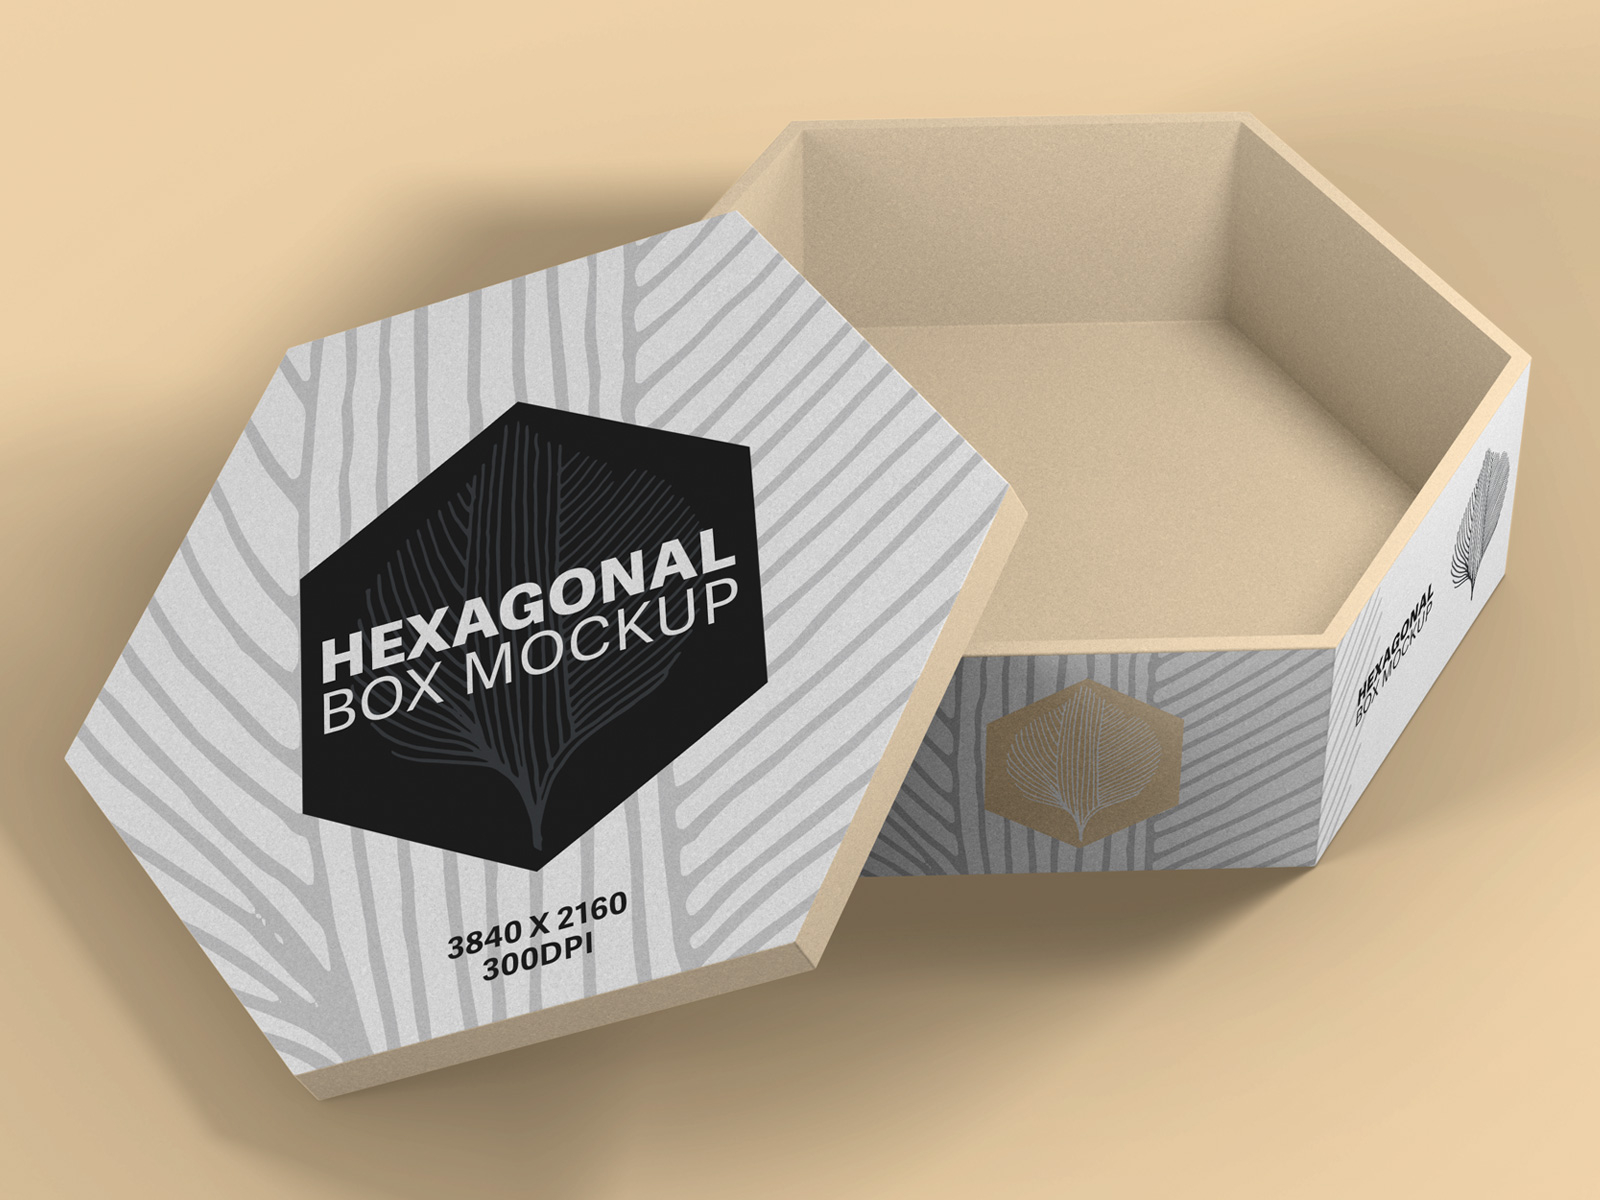 Download Hexagonal Box Mockup by Diego Sanchez for Medialoot on Dribbble